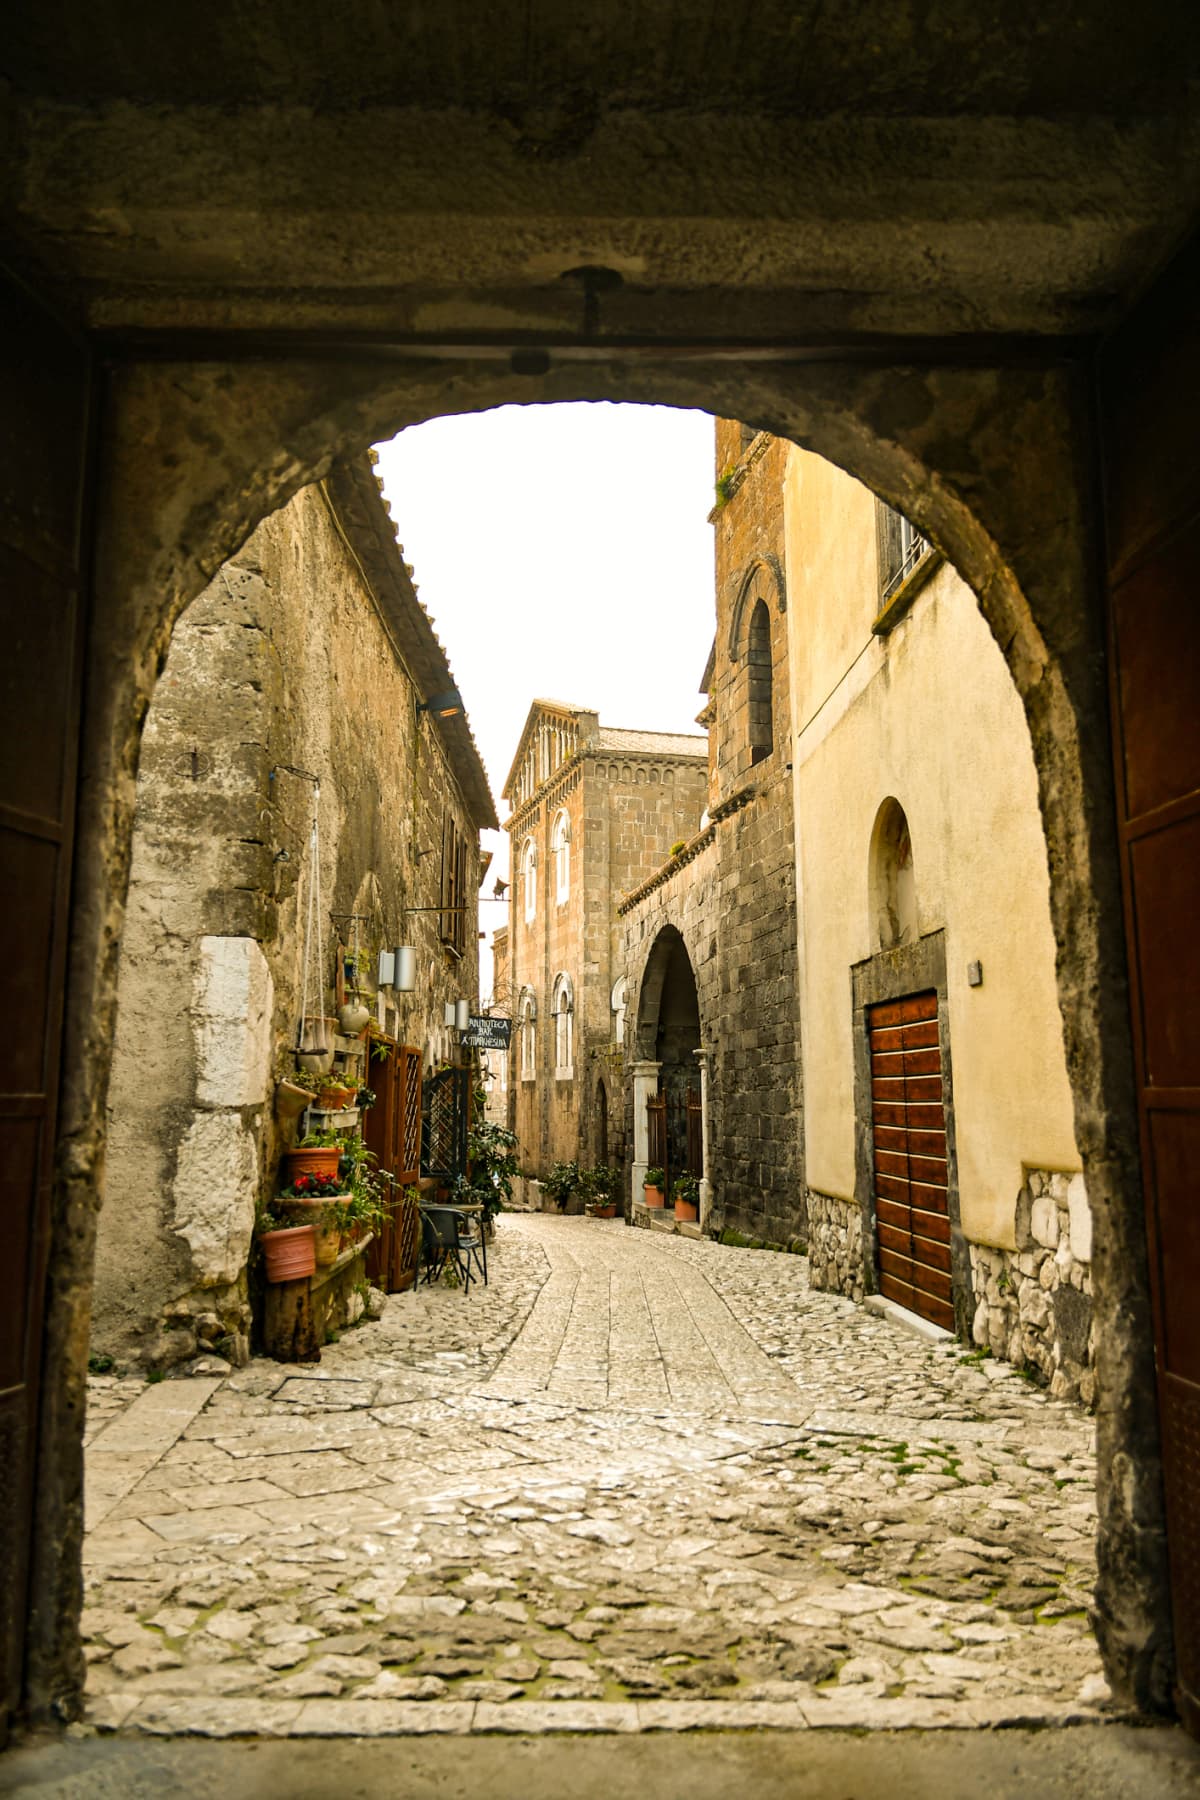 A narrow street among the old houses of a rural town in the province of Caserta.